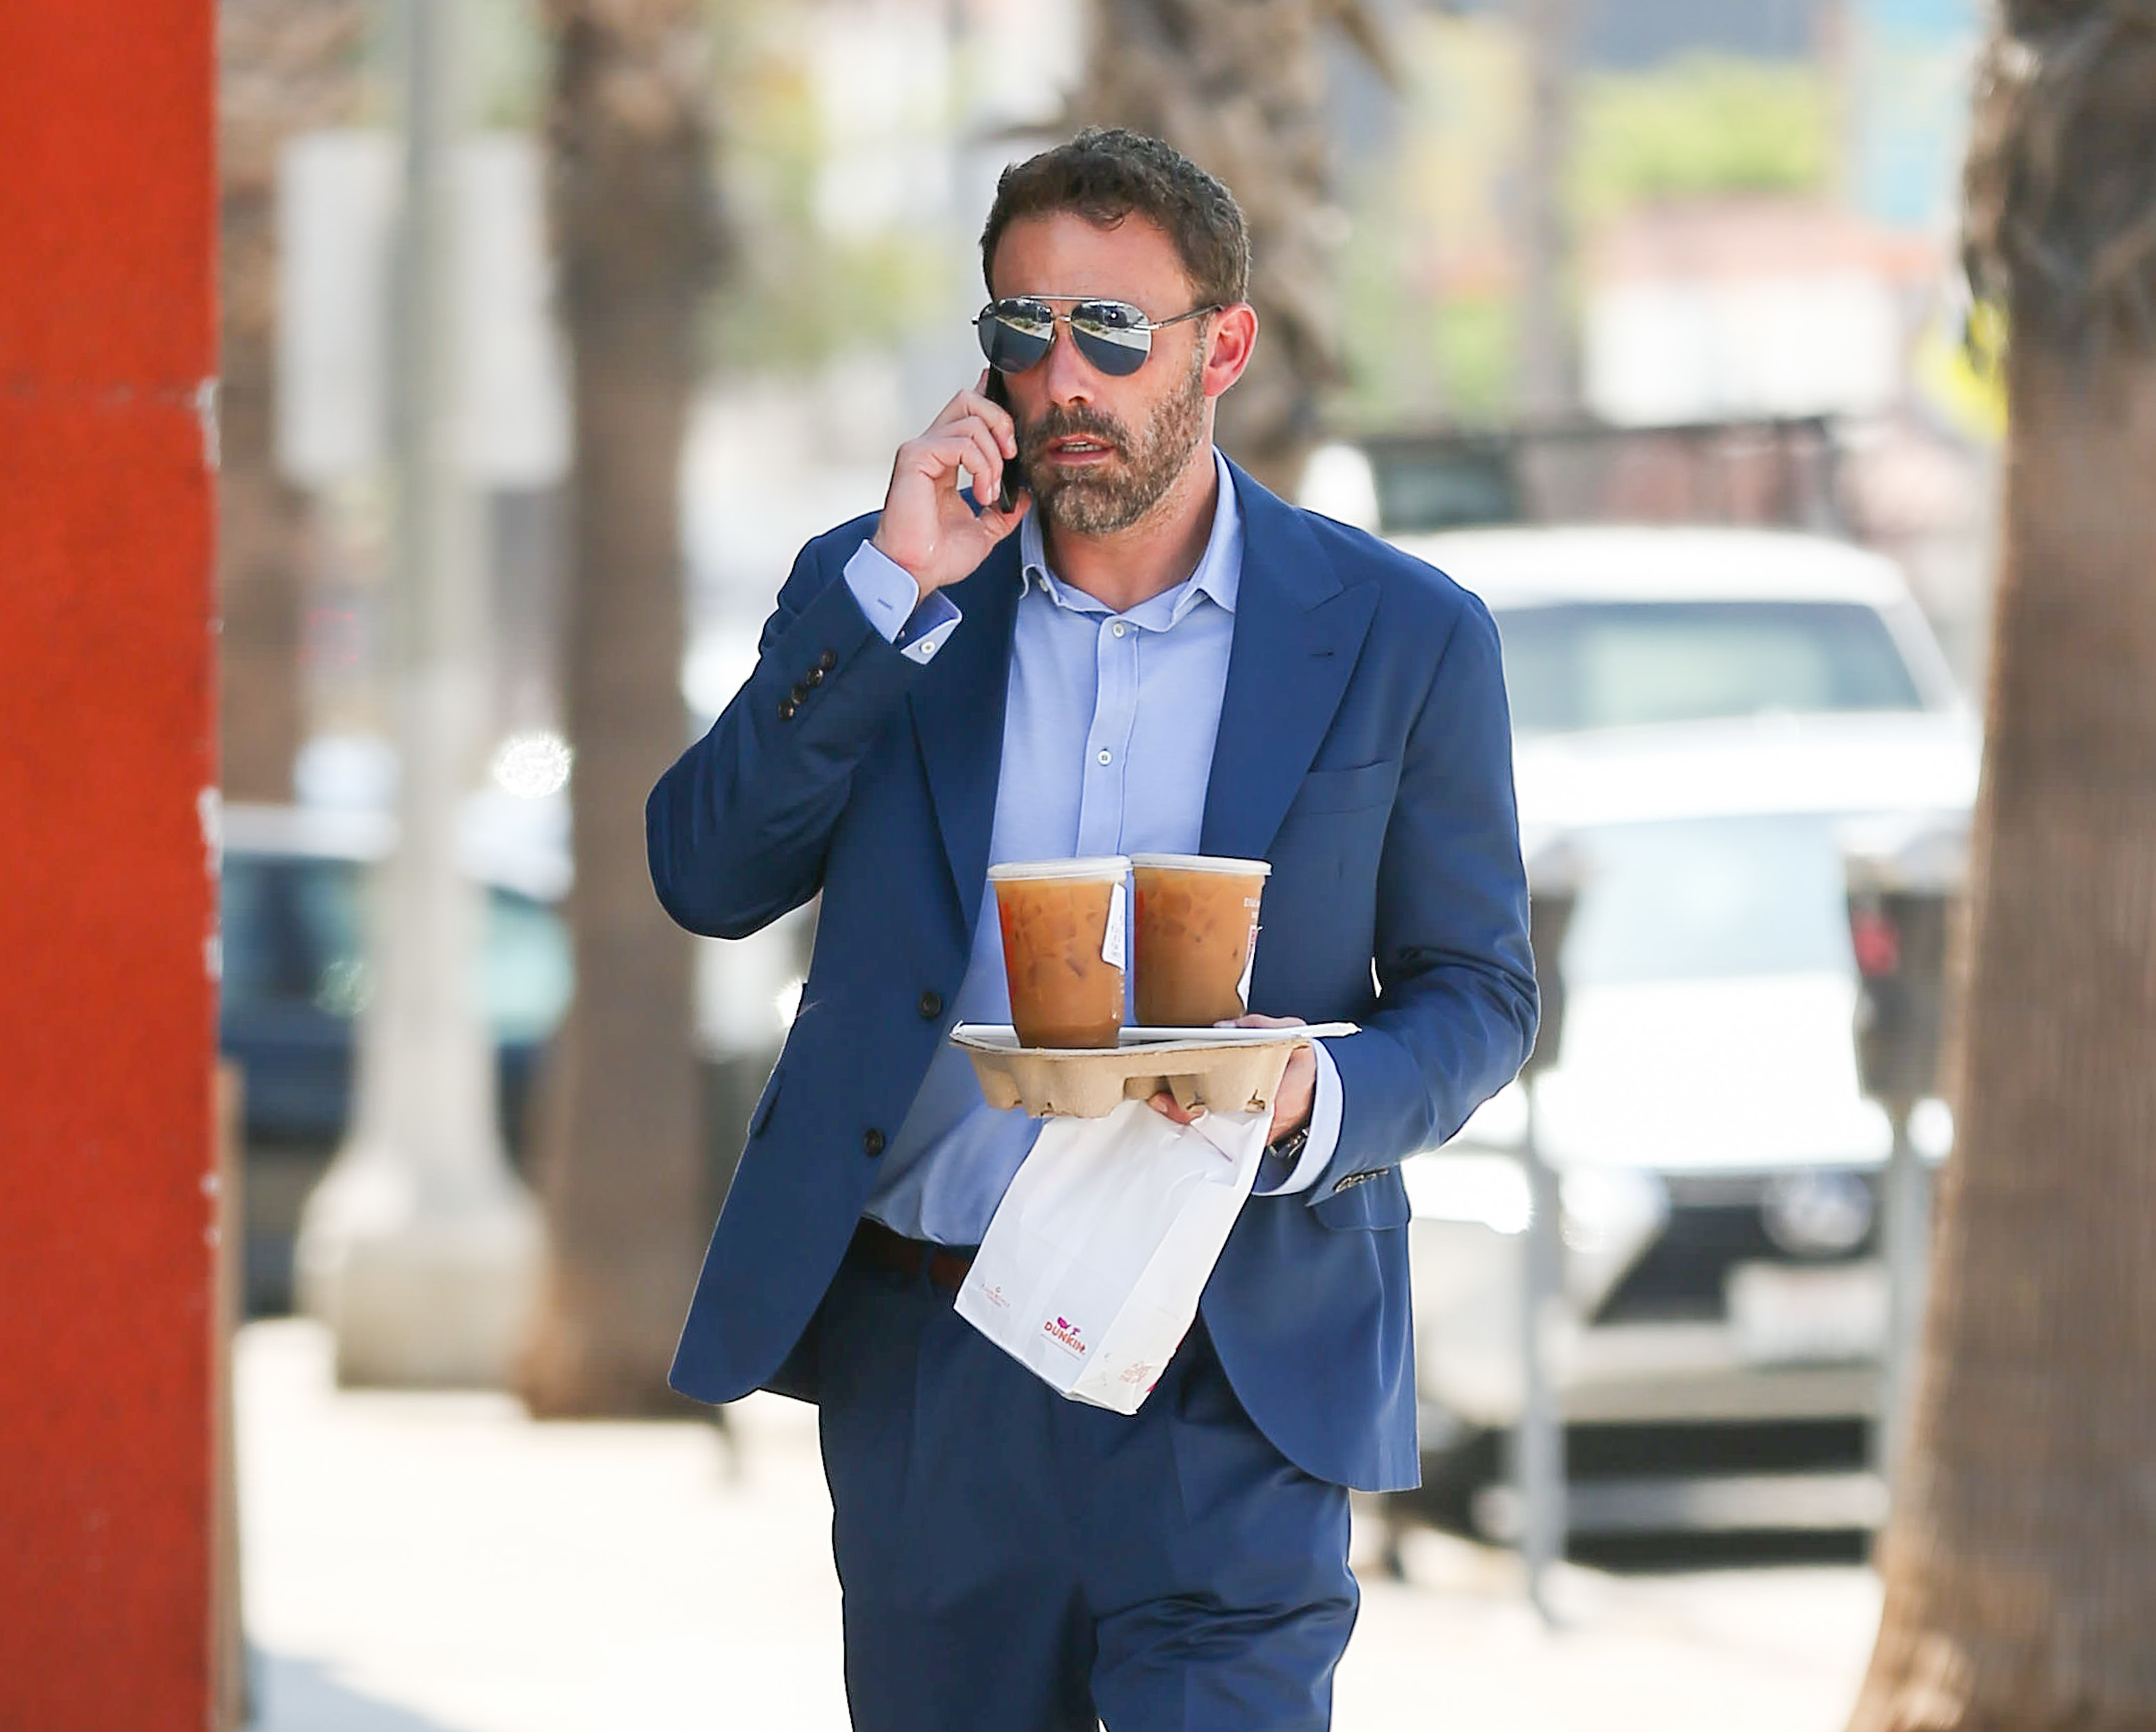 Ben Affleck on the phone while holding coffee